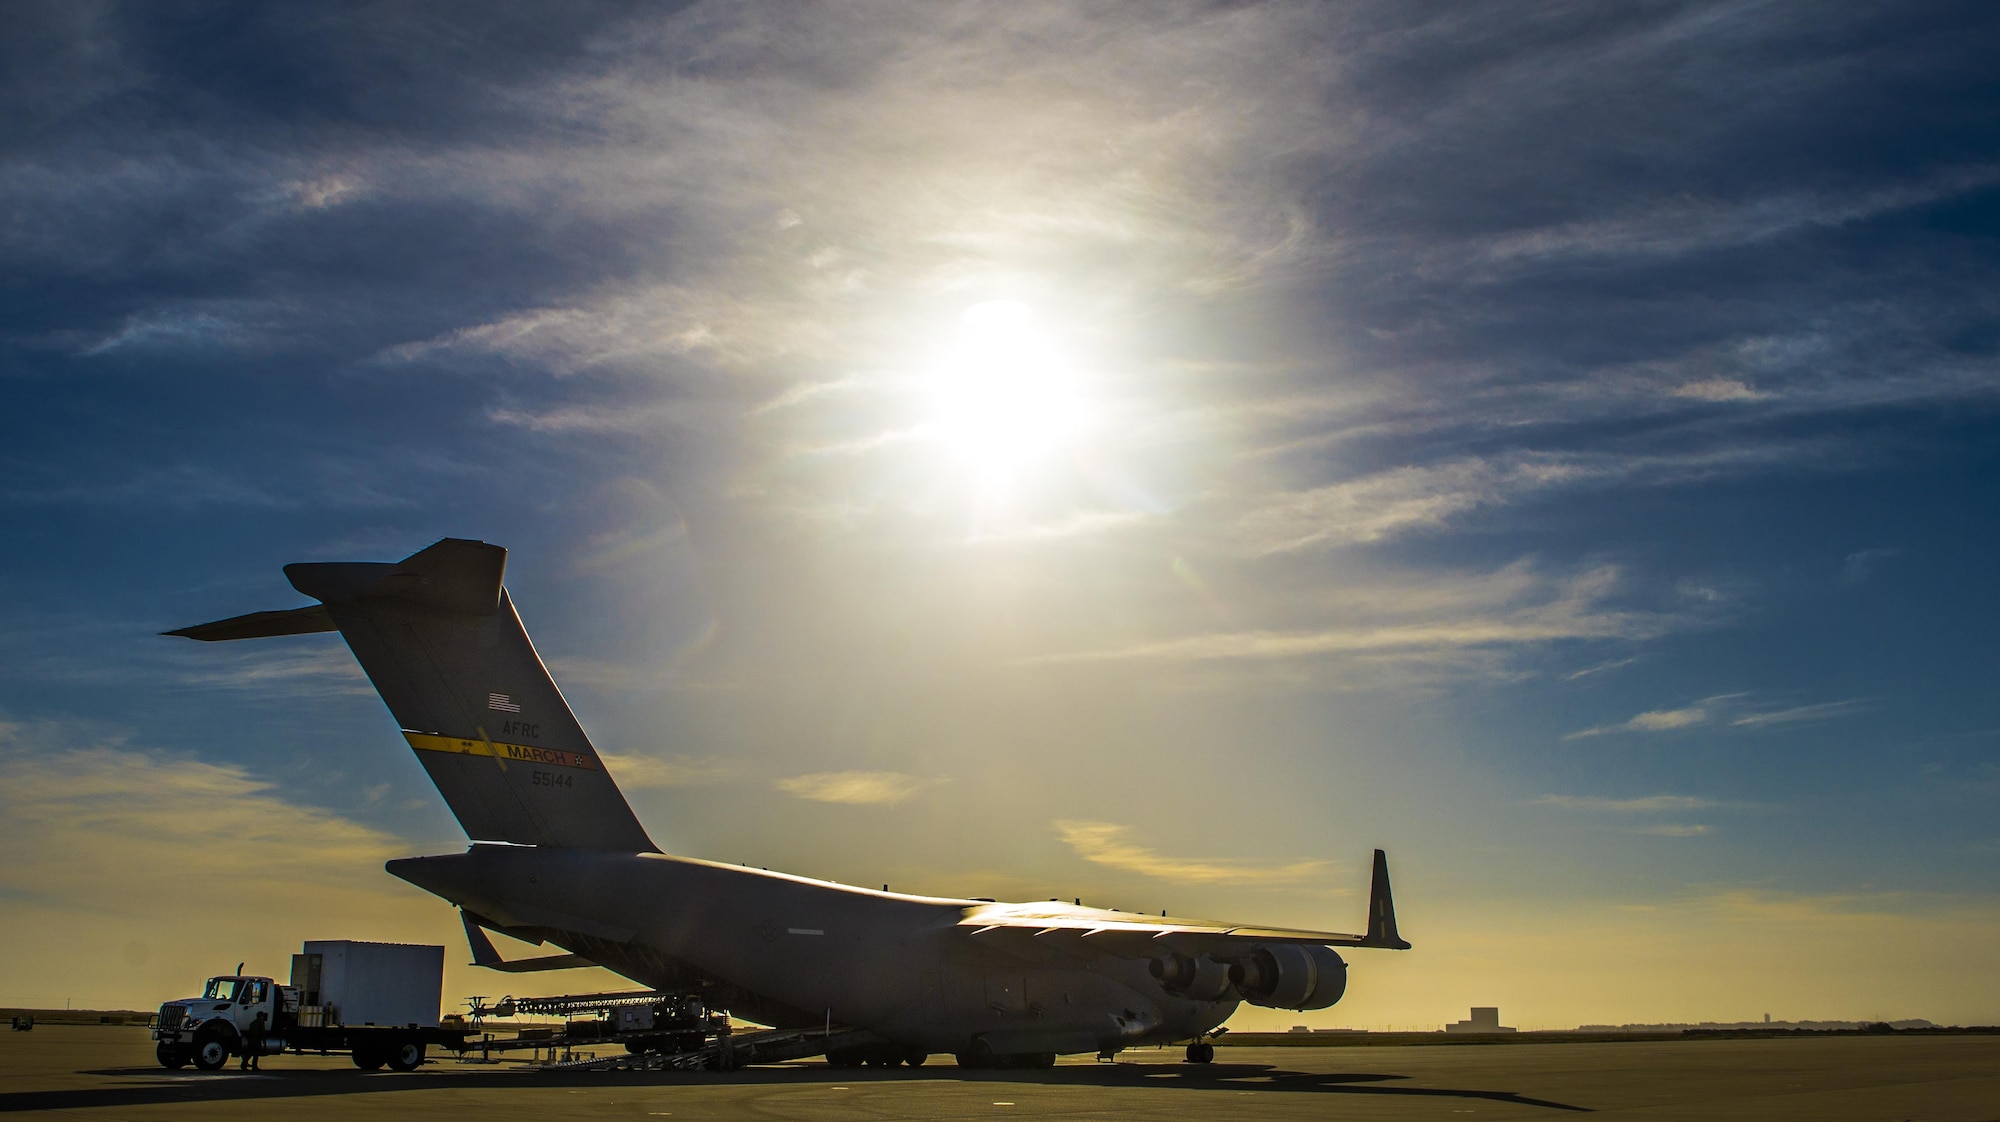 Members from the 26th Aerial Port Squadron load a communications vehicle from the U.S. Coast Guard's Mobile Contingency Communications Detachment West, onto an awaiting C-17 Globemaster III from March Air Reserve Base, California on April 27, 2017 at Vandenberg Air Force Base, California. Patriot Hook is an annual joint-service exercise coordinated by the Air Force Reserve, designed to integrate the military and first responders of federal, state and local agencies by providing training to mobilize quickly and deploying in military aircraft in the event of a regional emergency or natural disaster. (U.S. Air Force photo by Benjamin Faske)